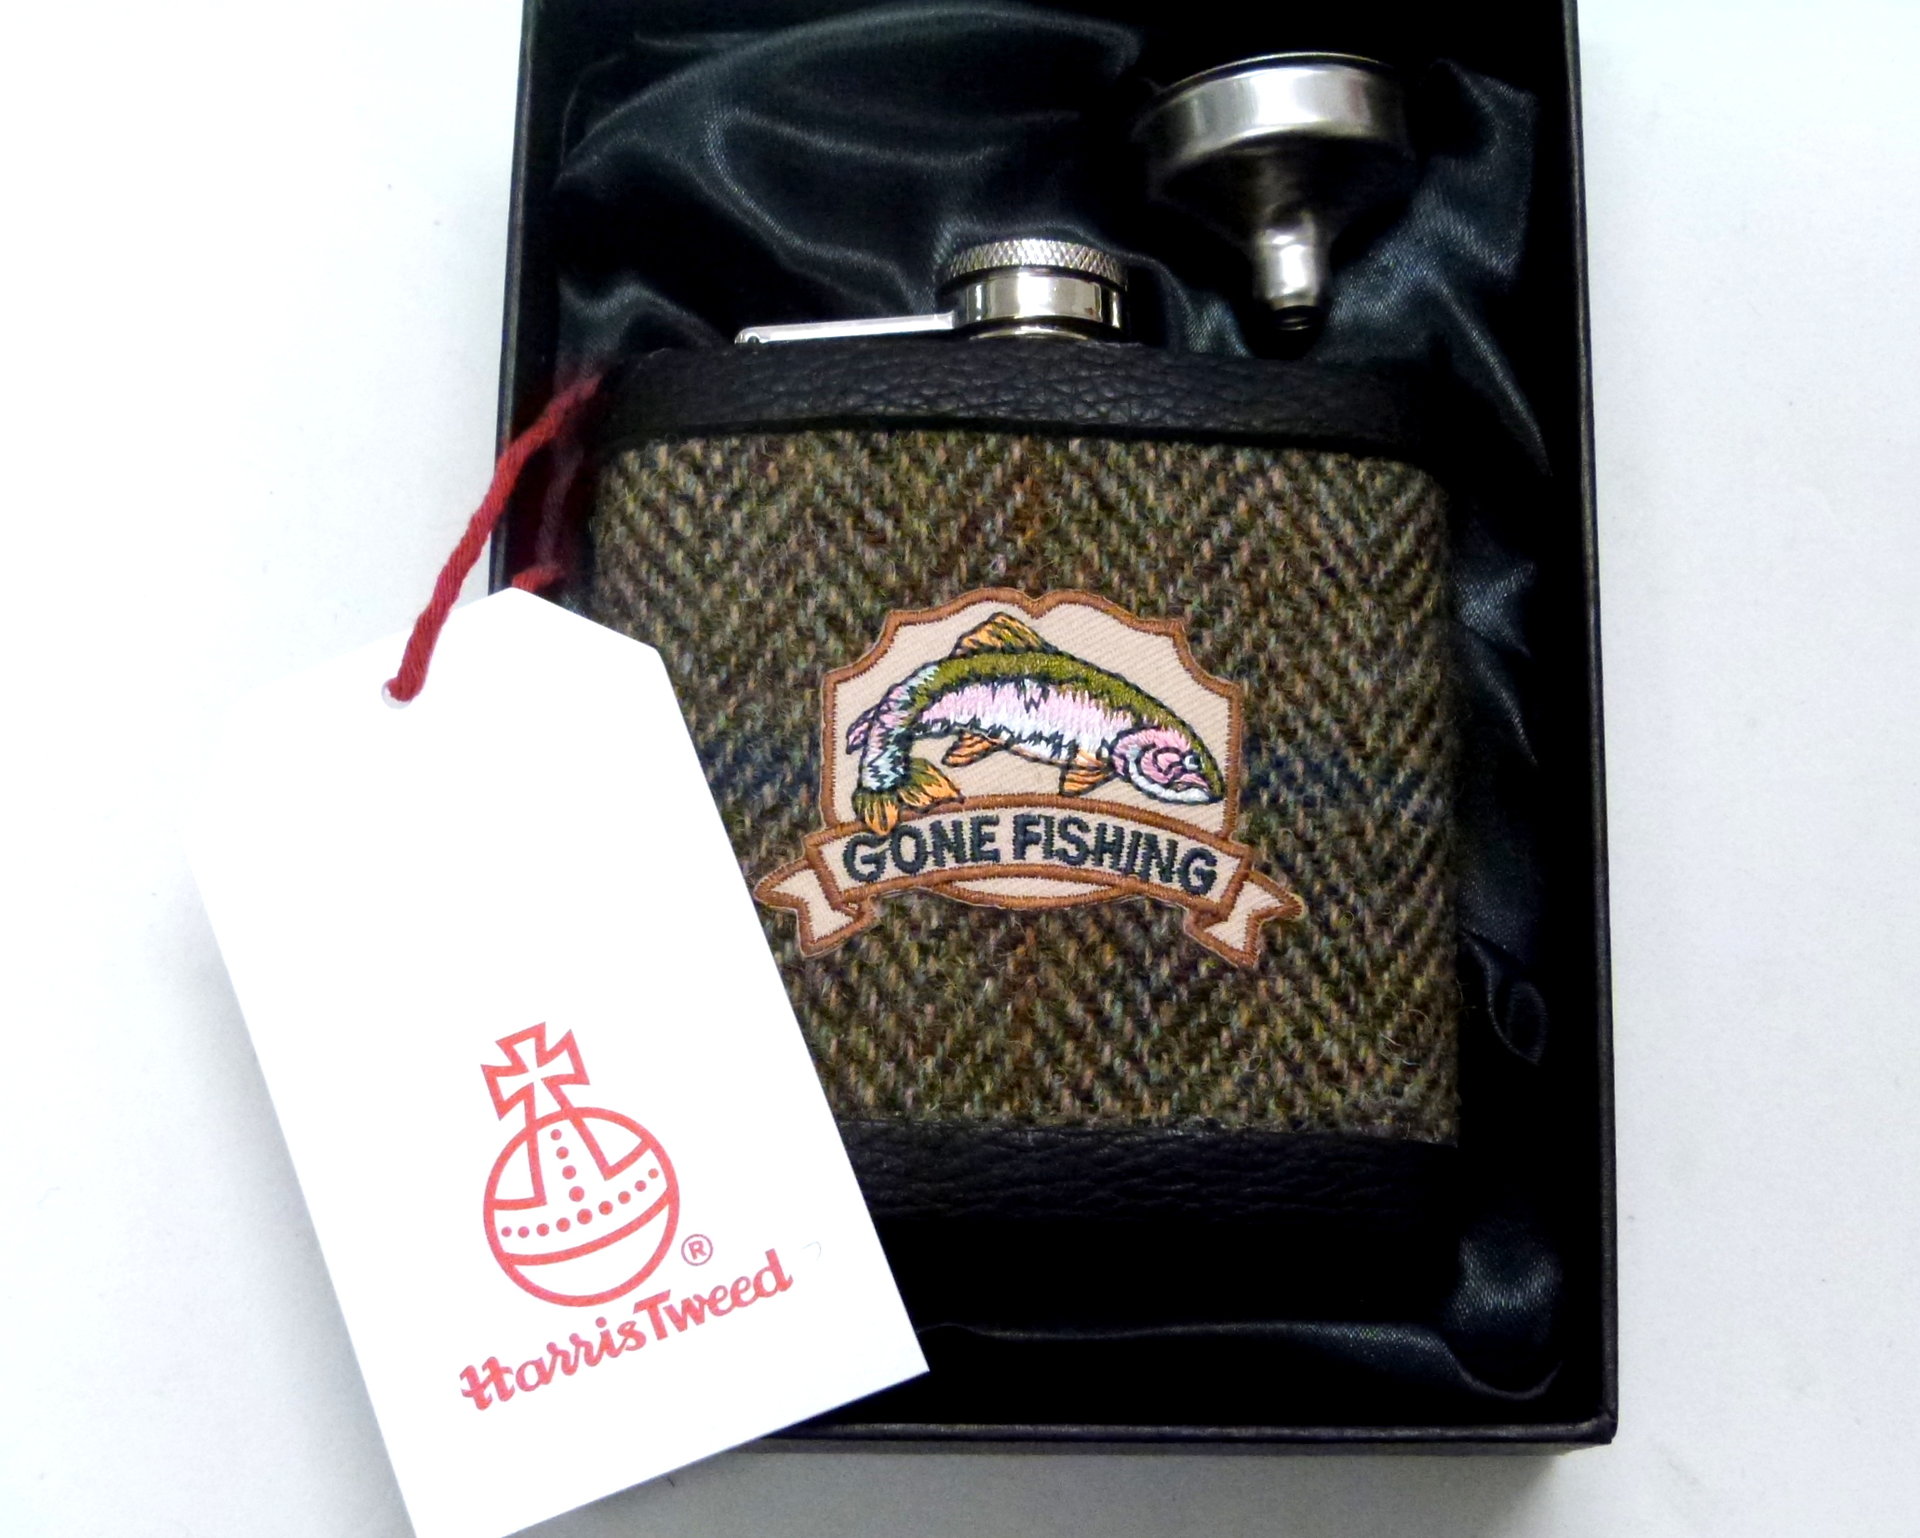 Harris Tweed hip flask embellished Gone Fishing, fisherman's gift, ideal for Dad, Father's Day, birthday, Christmas.